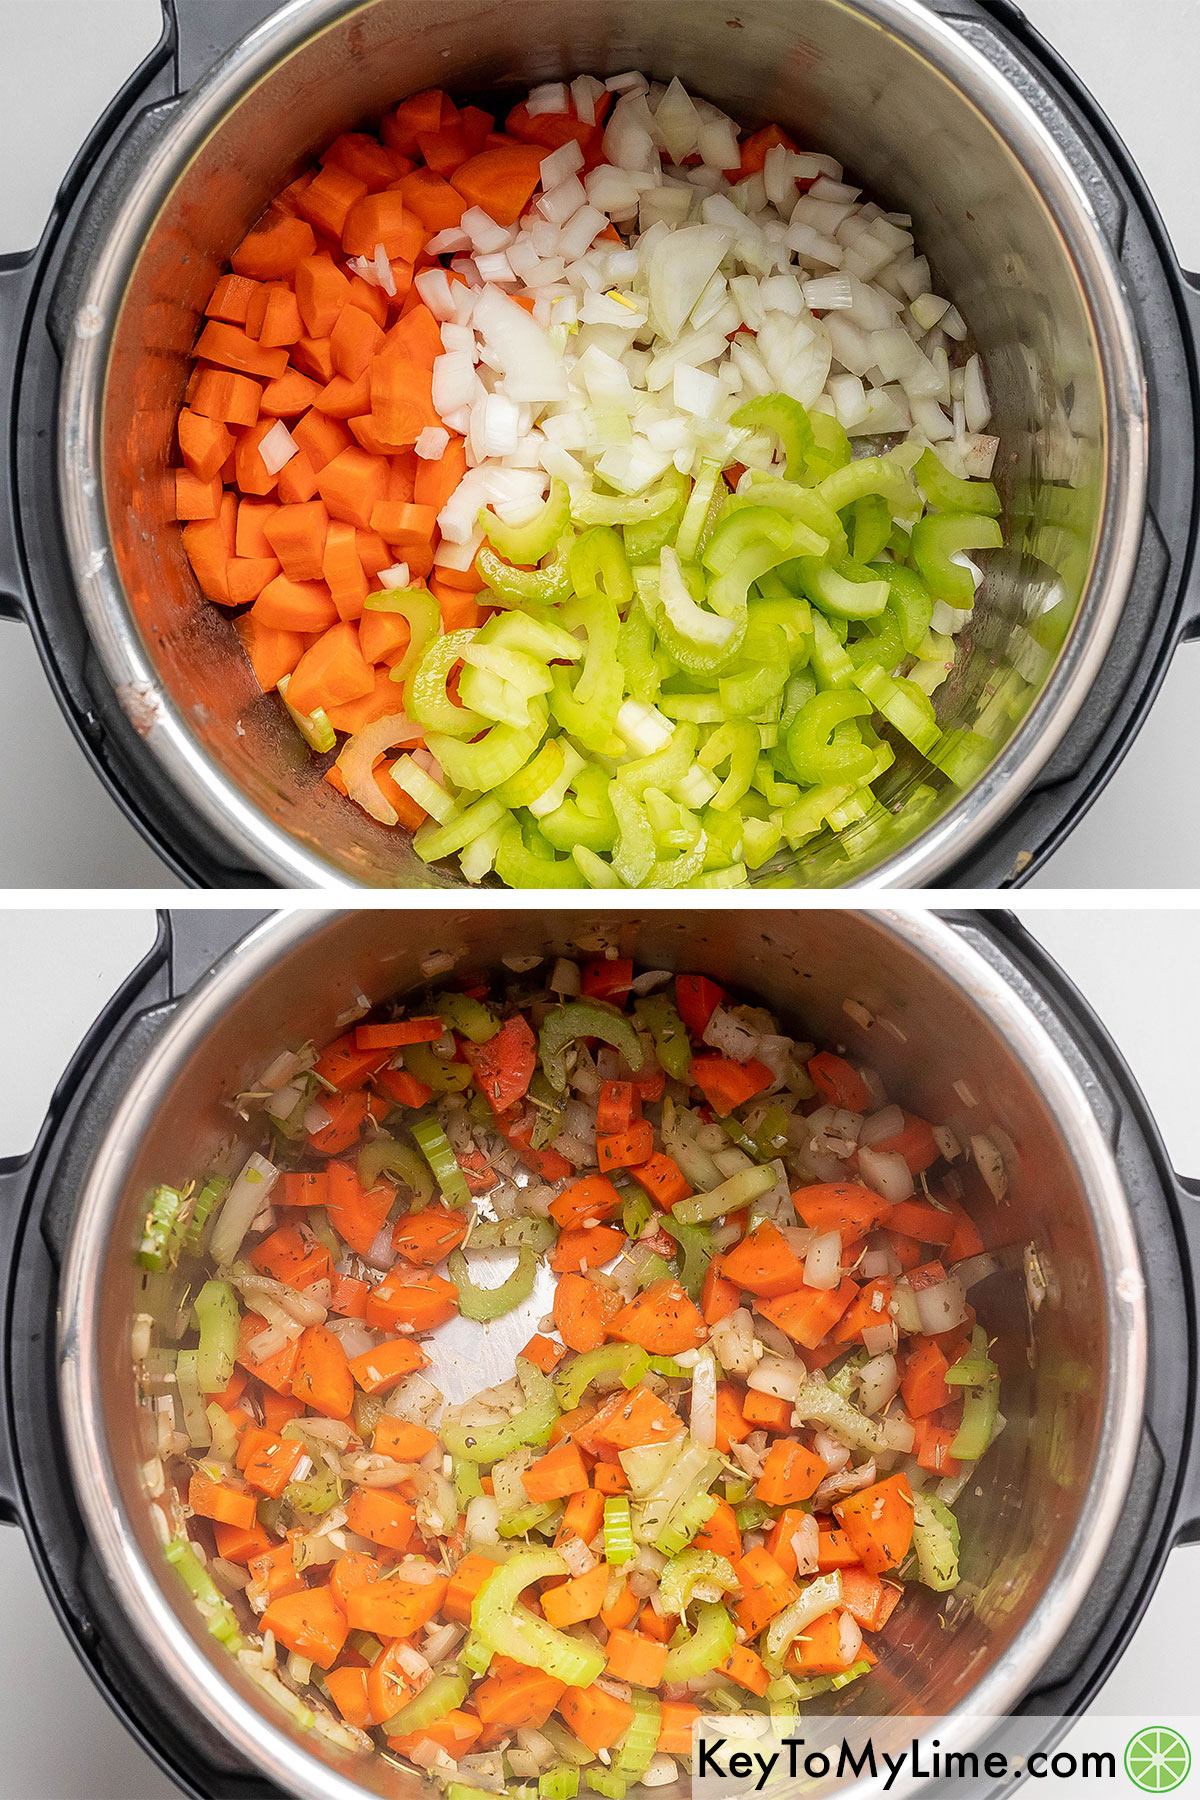 Adding the vegetables to the instant pot and sauteing until softened the mixing in garlic, rosemary and thyme.